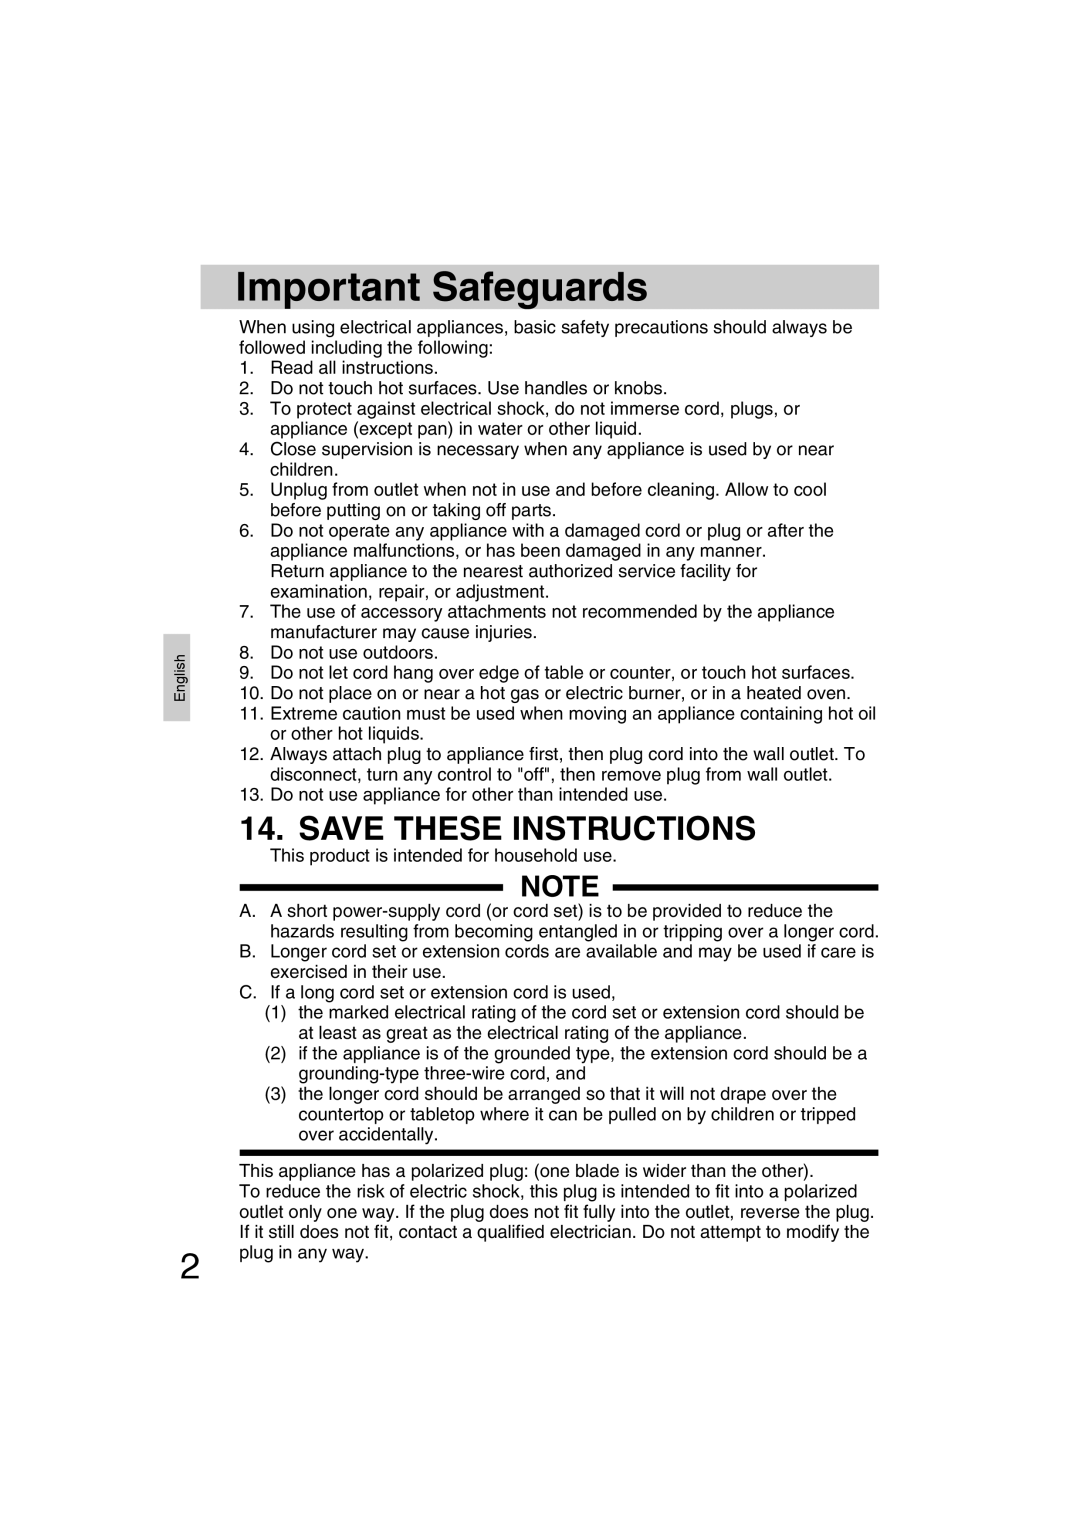 Panasonic SR-TEL18 manual Important Safeguards, Save These Instructions 